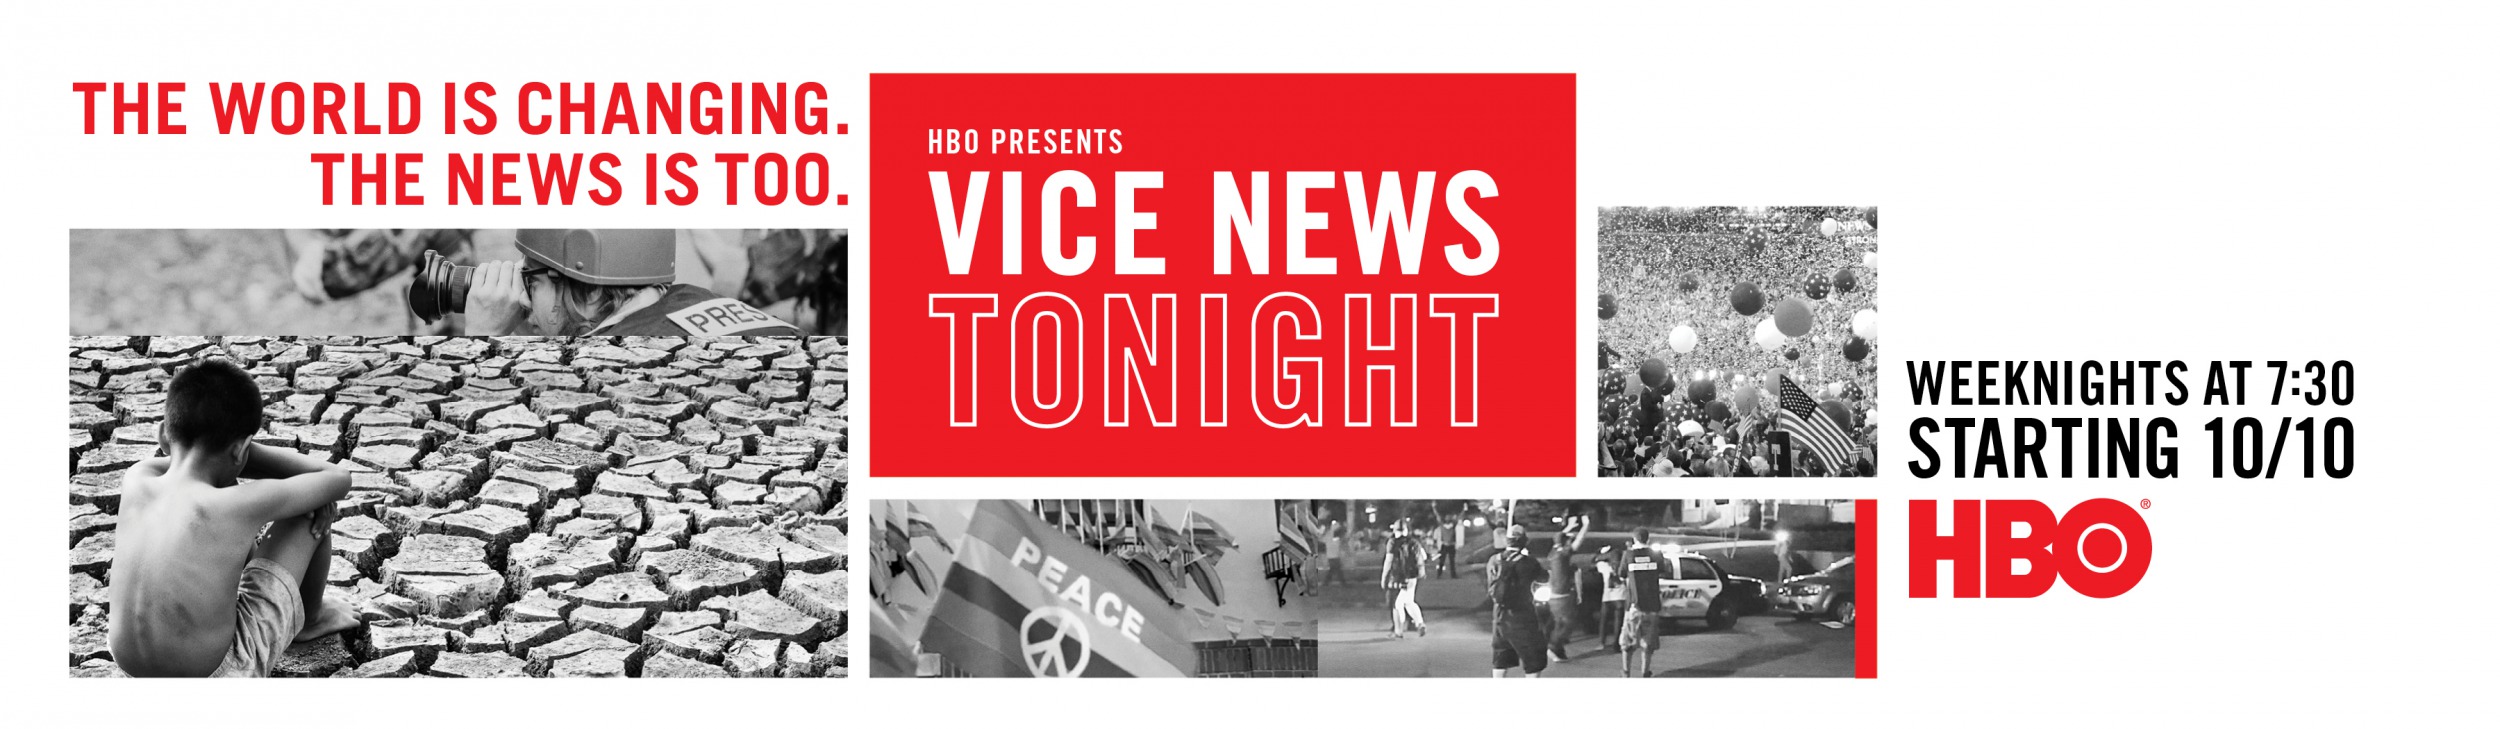 Mega Sized TV Poster Image for Vice News Tonight (#2 of 2)